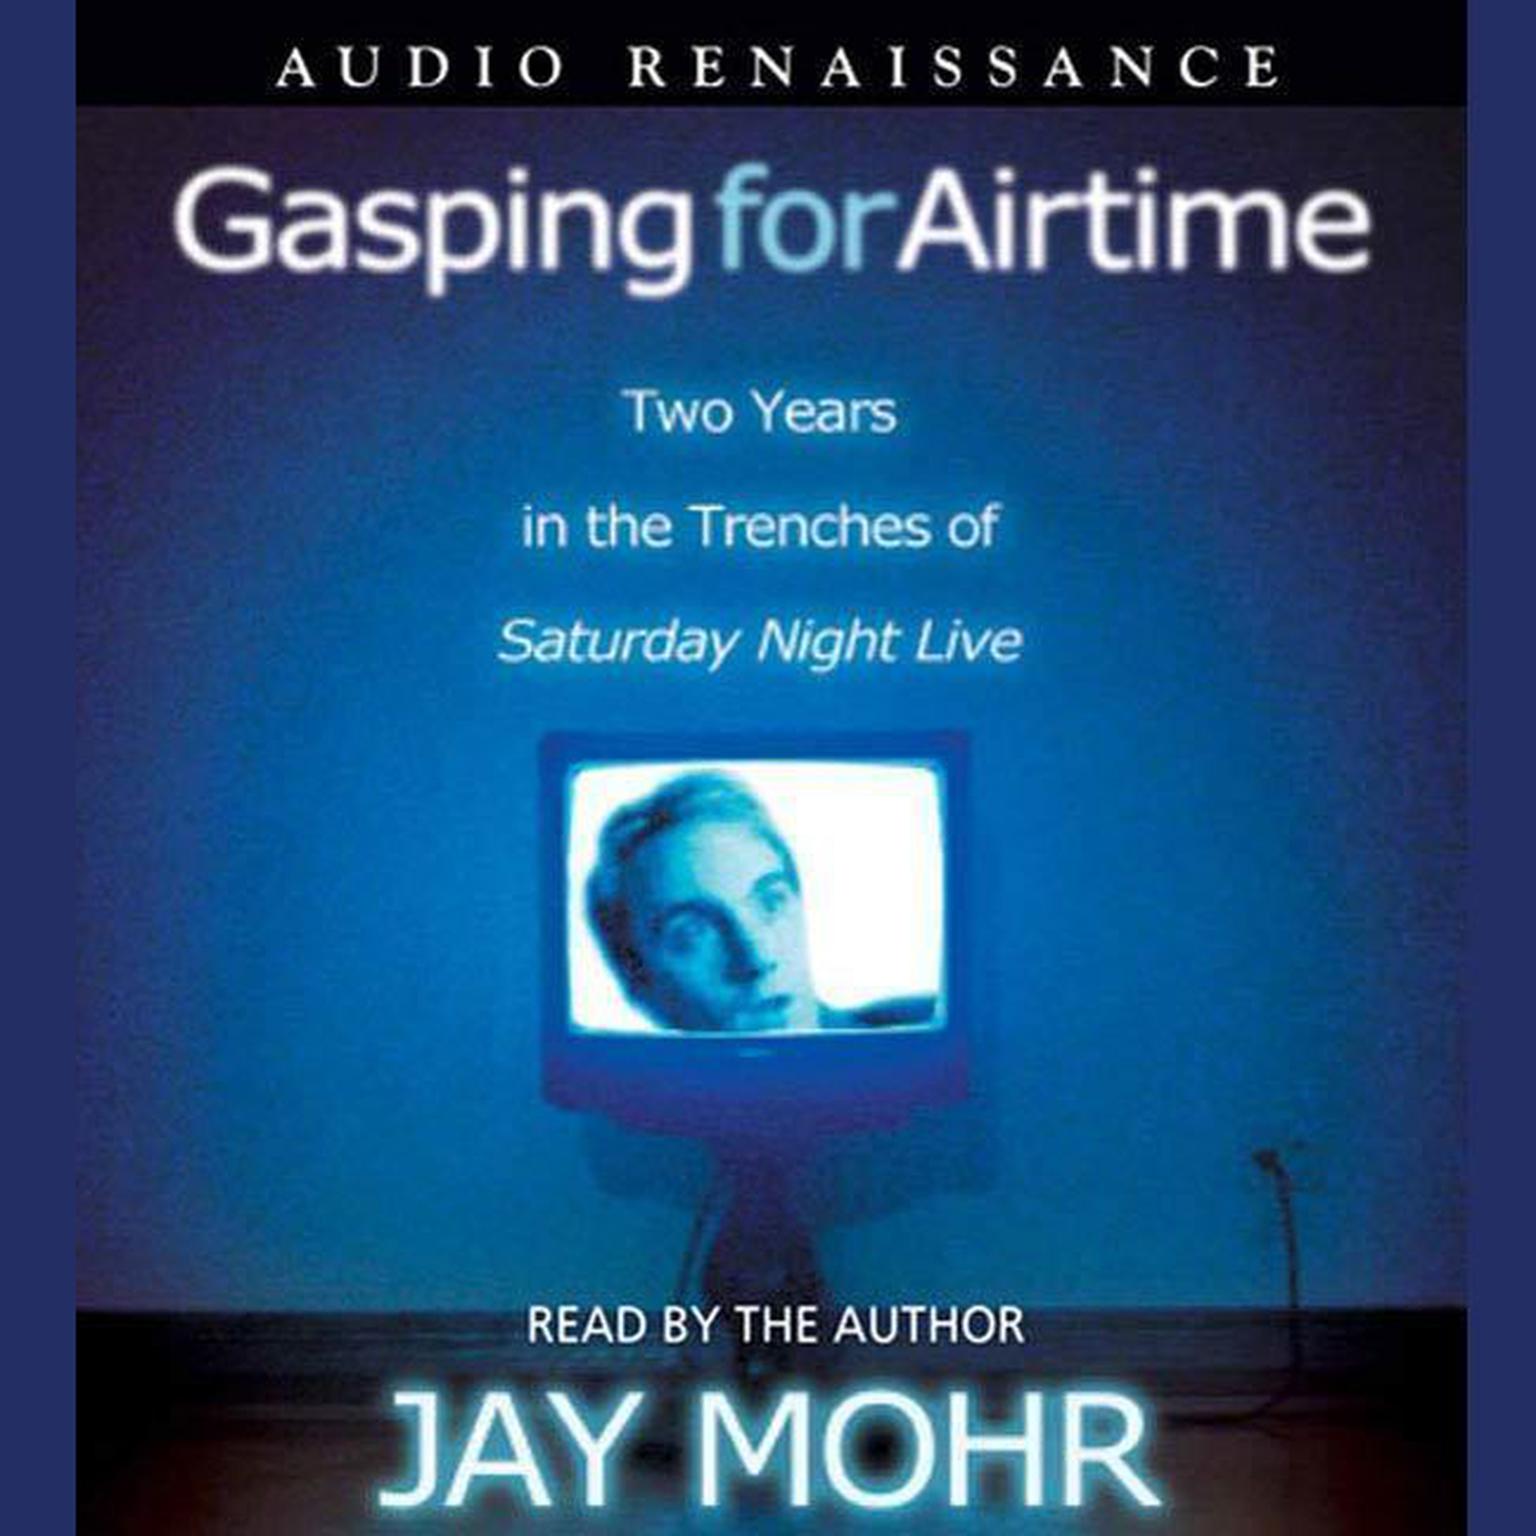 Gasping for Airtime (Abridged): Two Years in the Trenches at Saturday Night Live Audiobook, by Jay Mohr